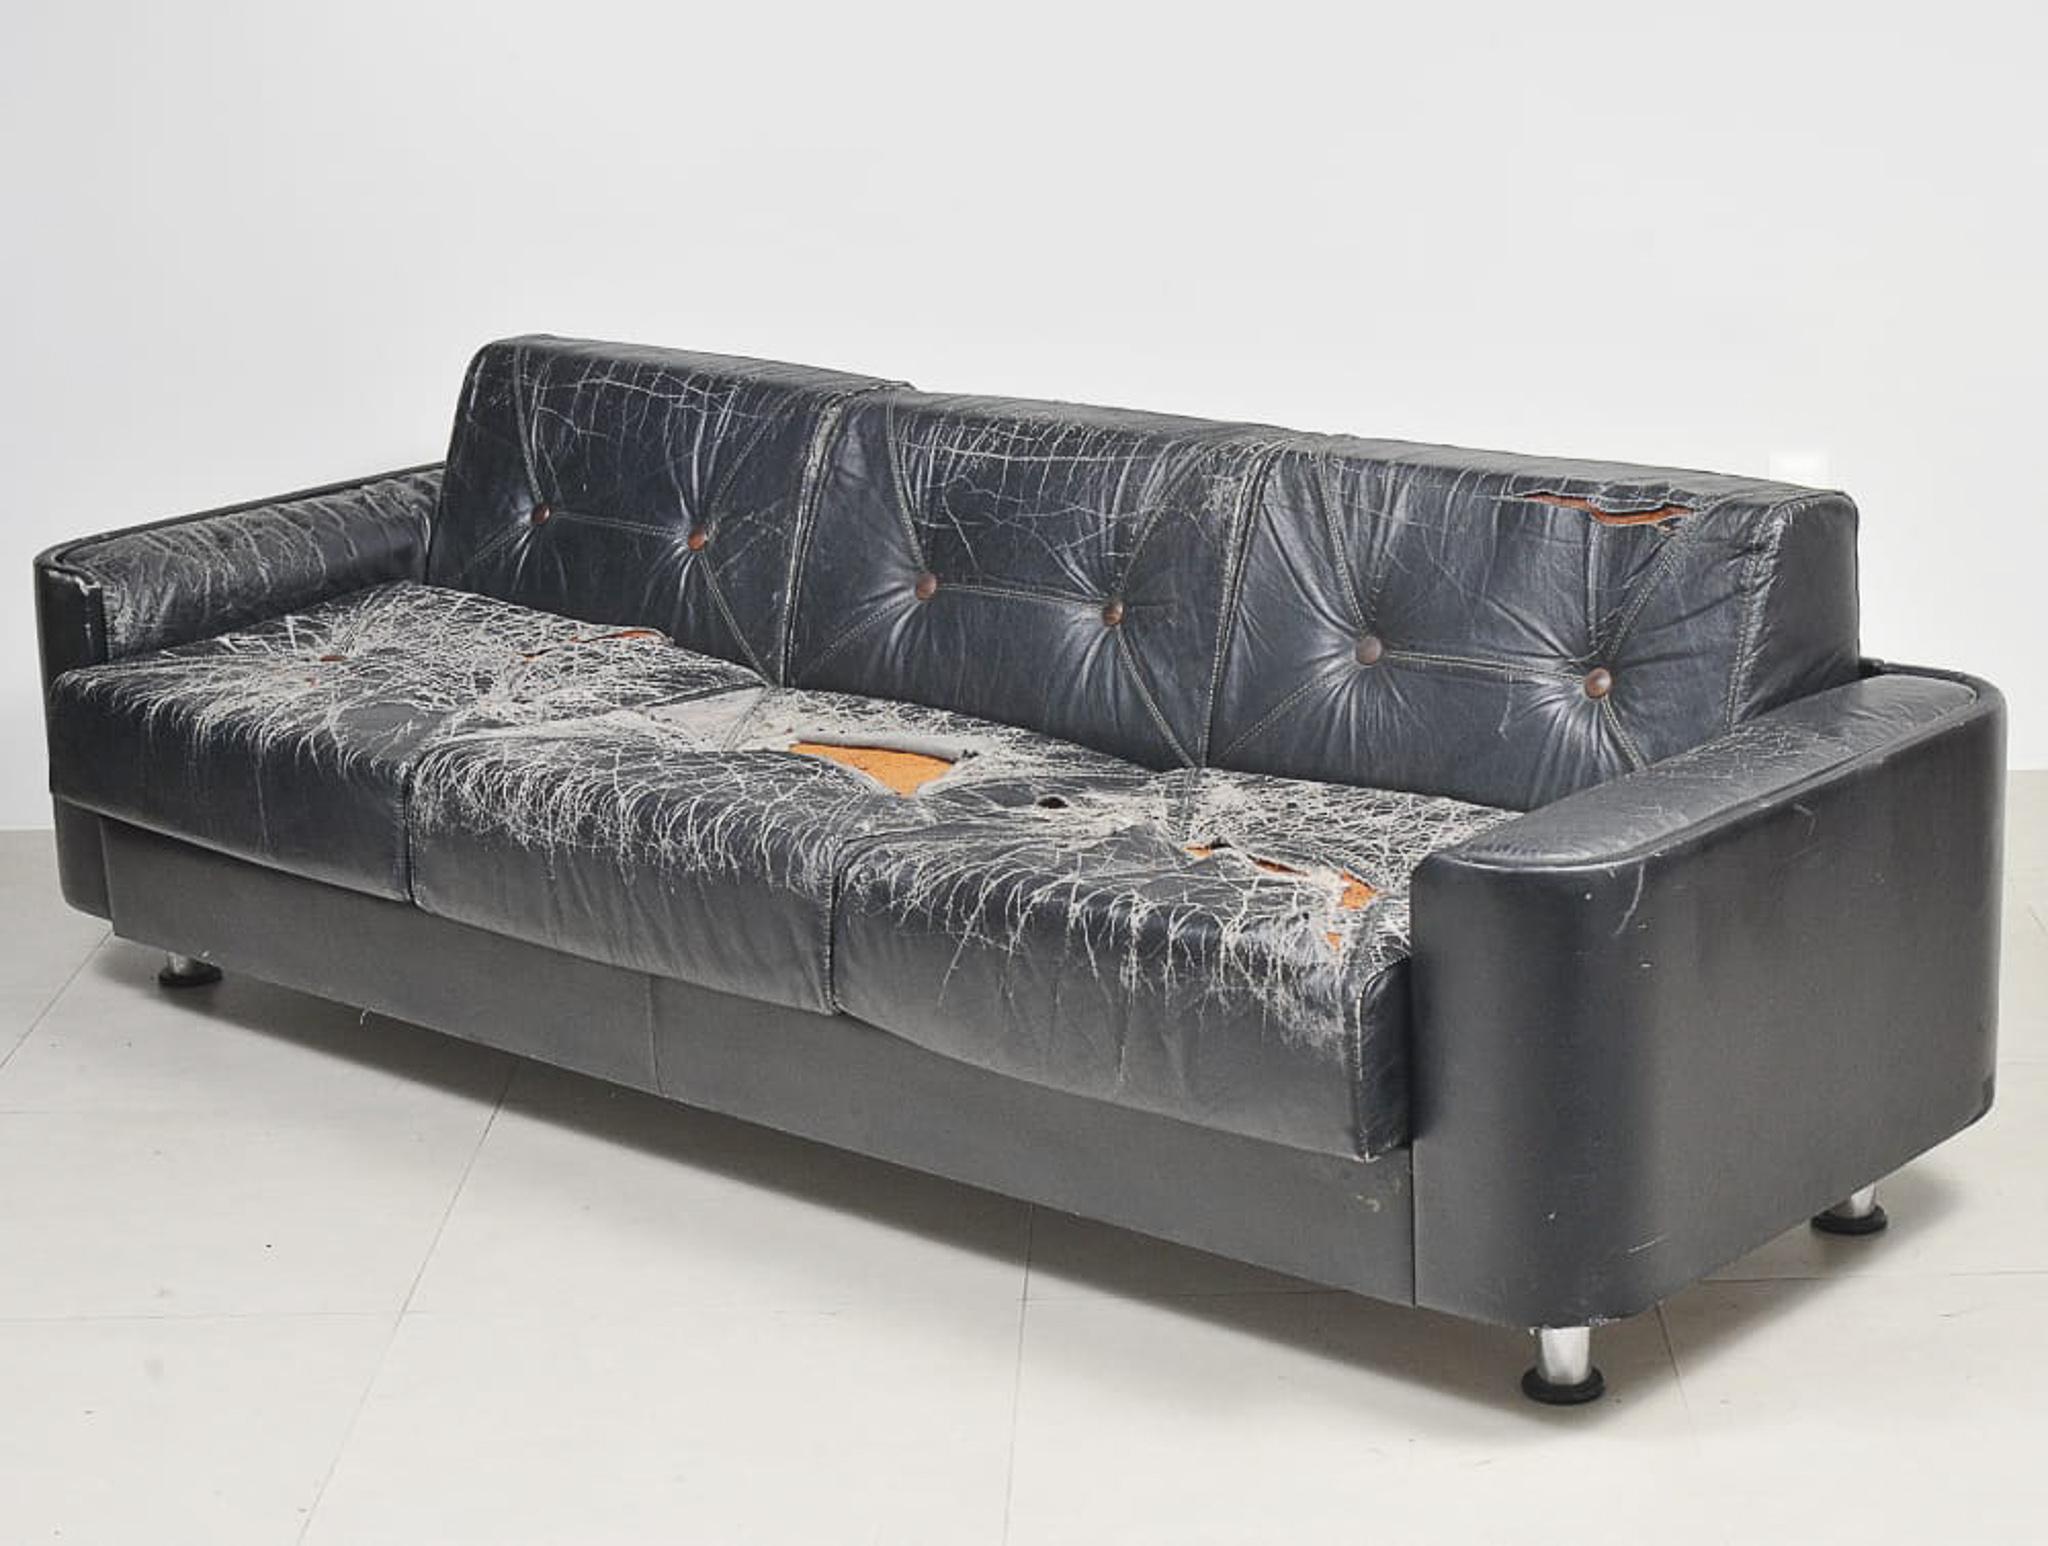 Mid-Century Modern Sofa in Black Leather & Wood by Jorge Zalszupin, Brazil, 1970 For Sale 9